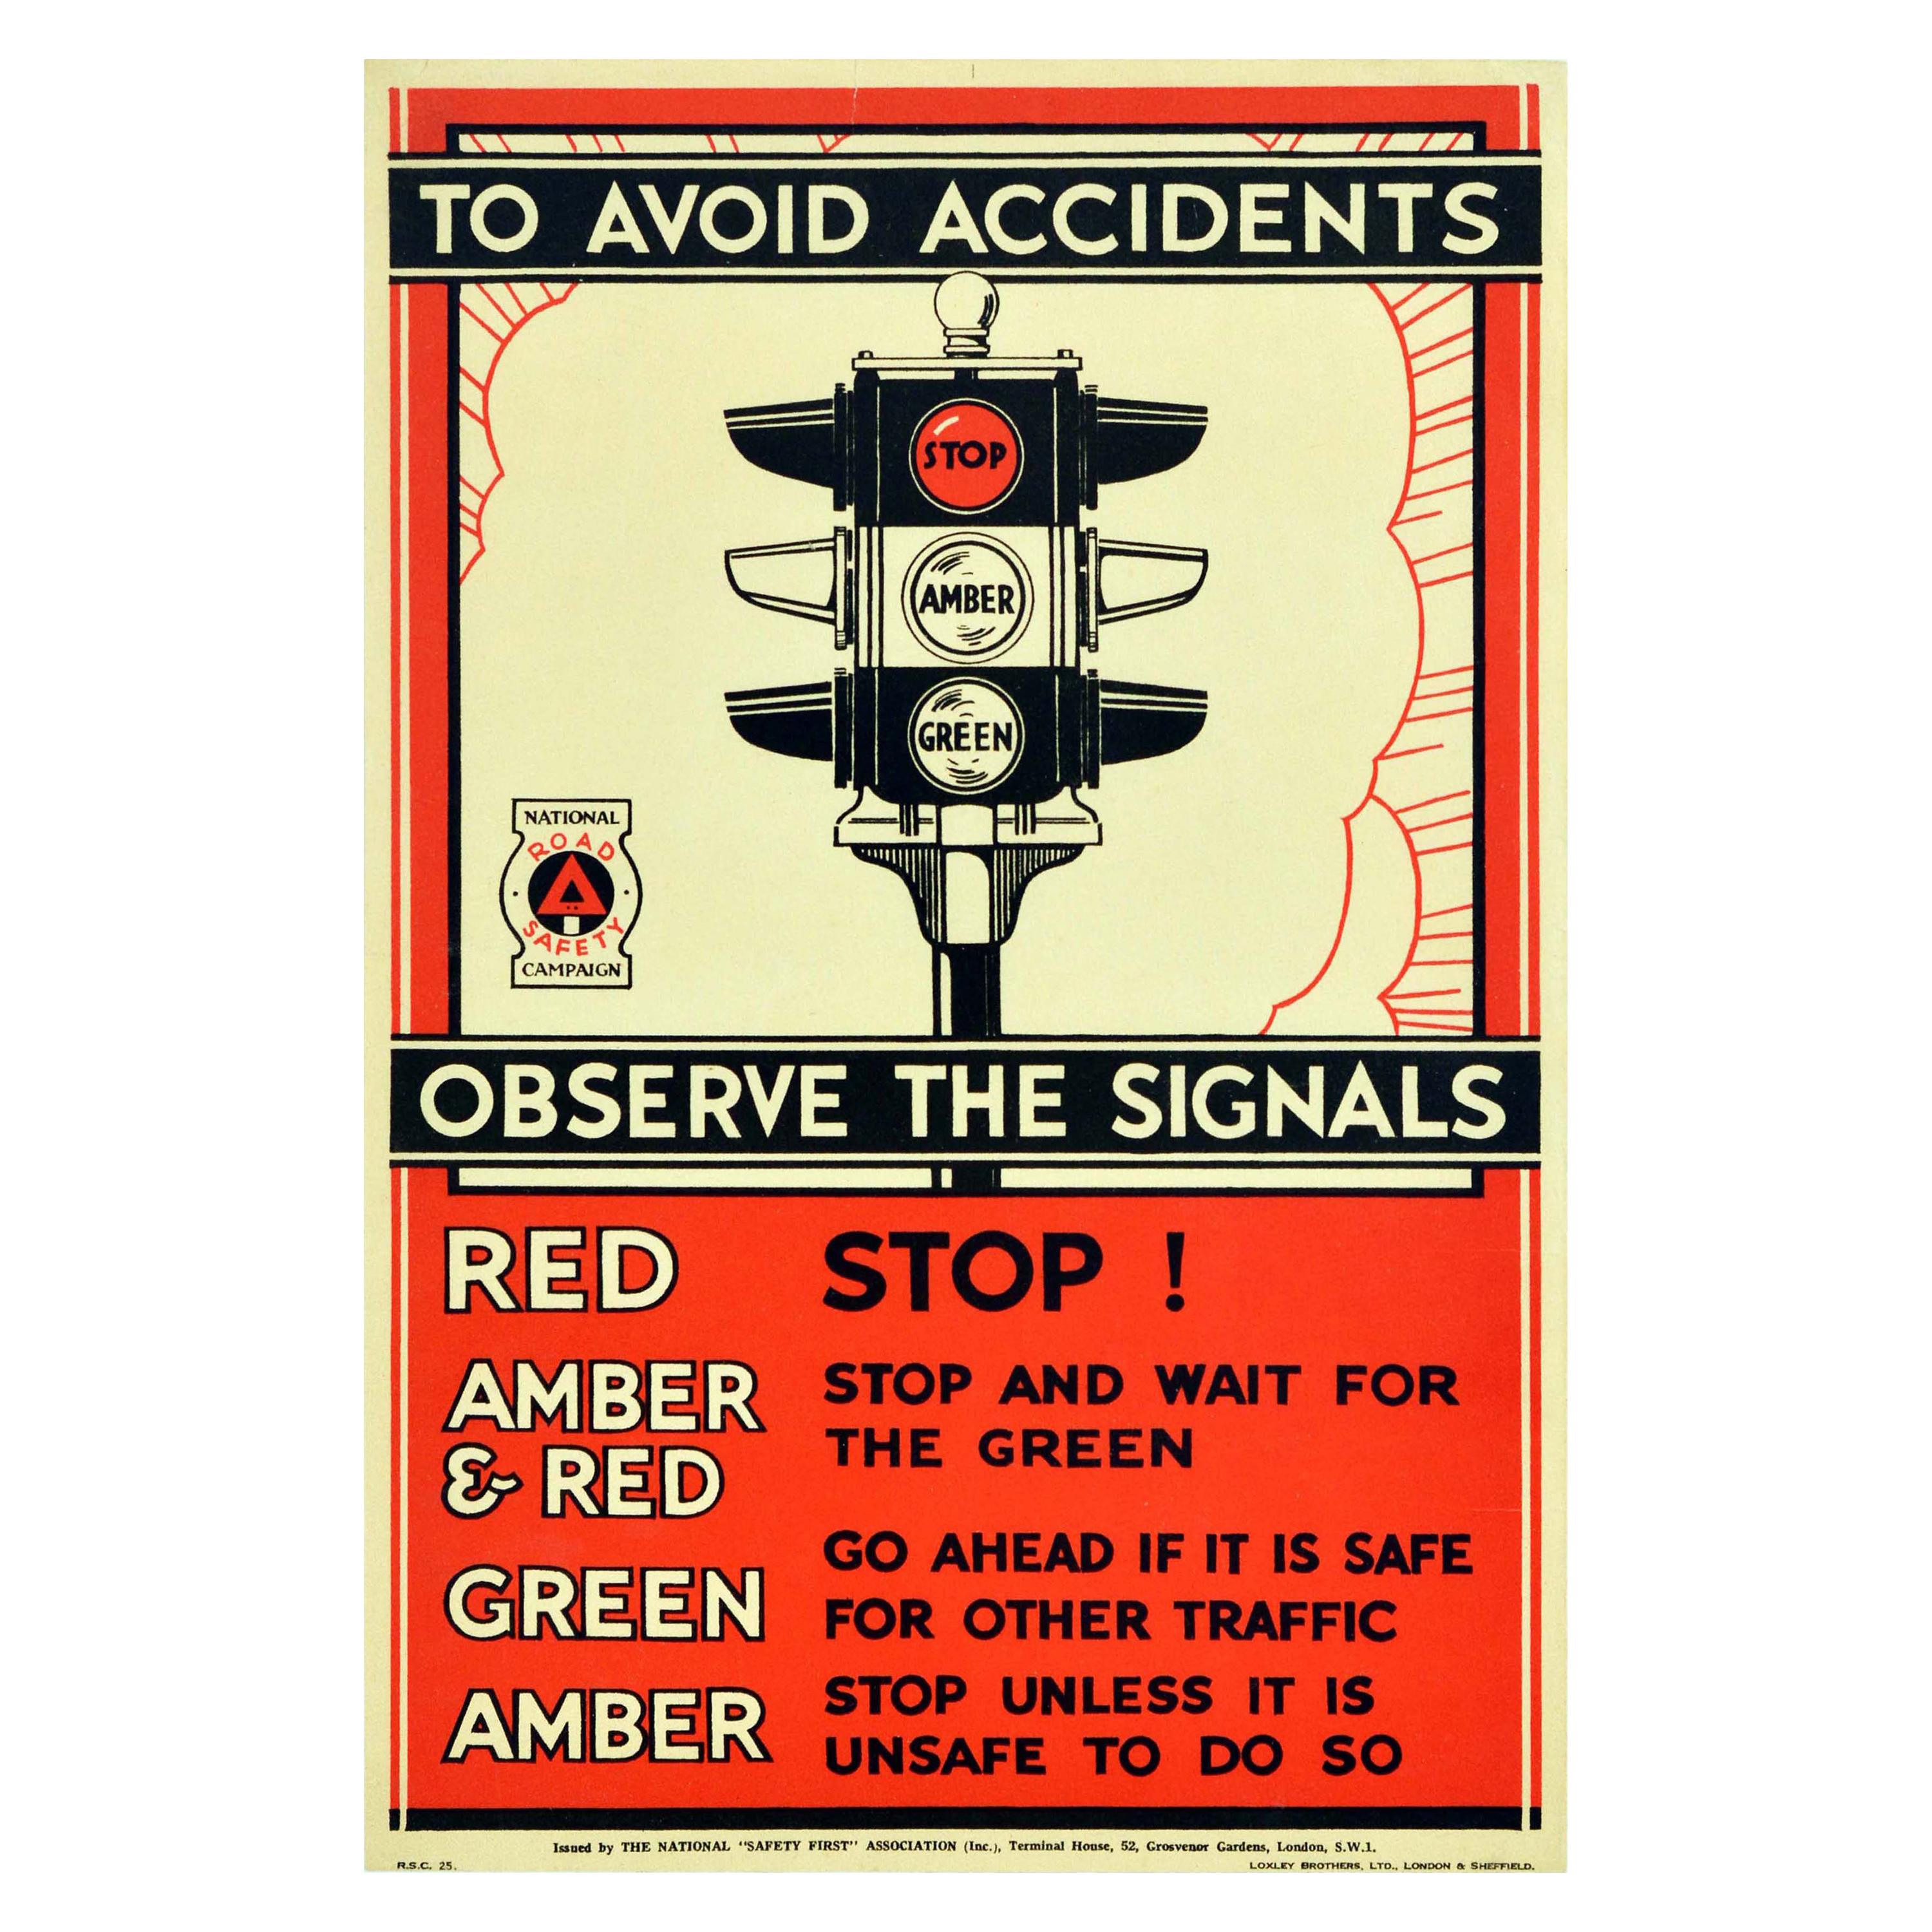 Original Vintage Road Safety Poster Avoid Accidents Traffic Light Signals Stop!